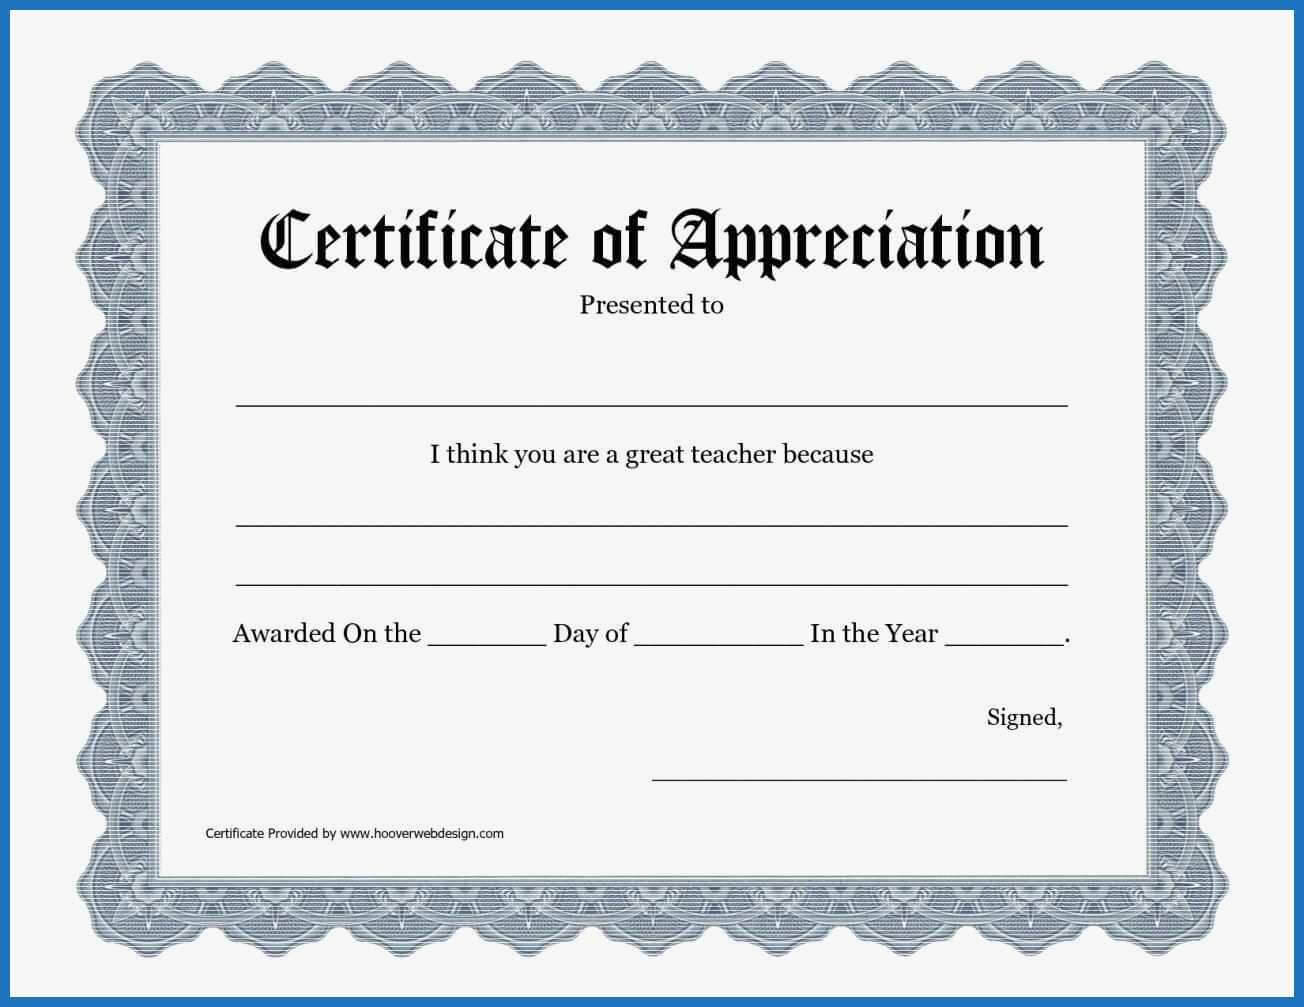 Certificate Templates: Free Templates For Certificate Of With Certificate Of Appreciation Template Free Printable